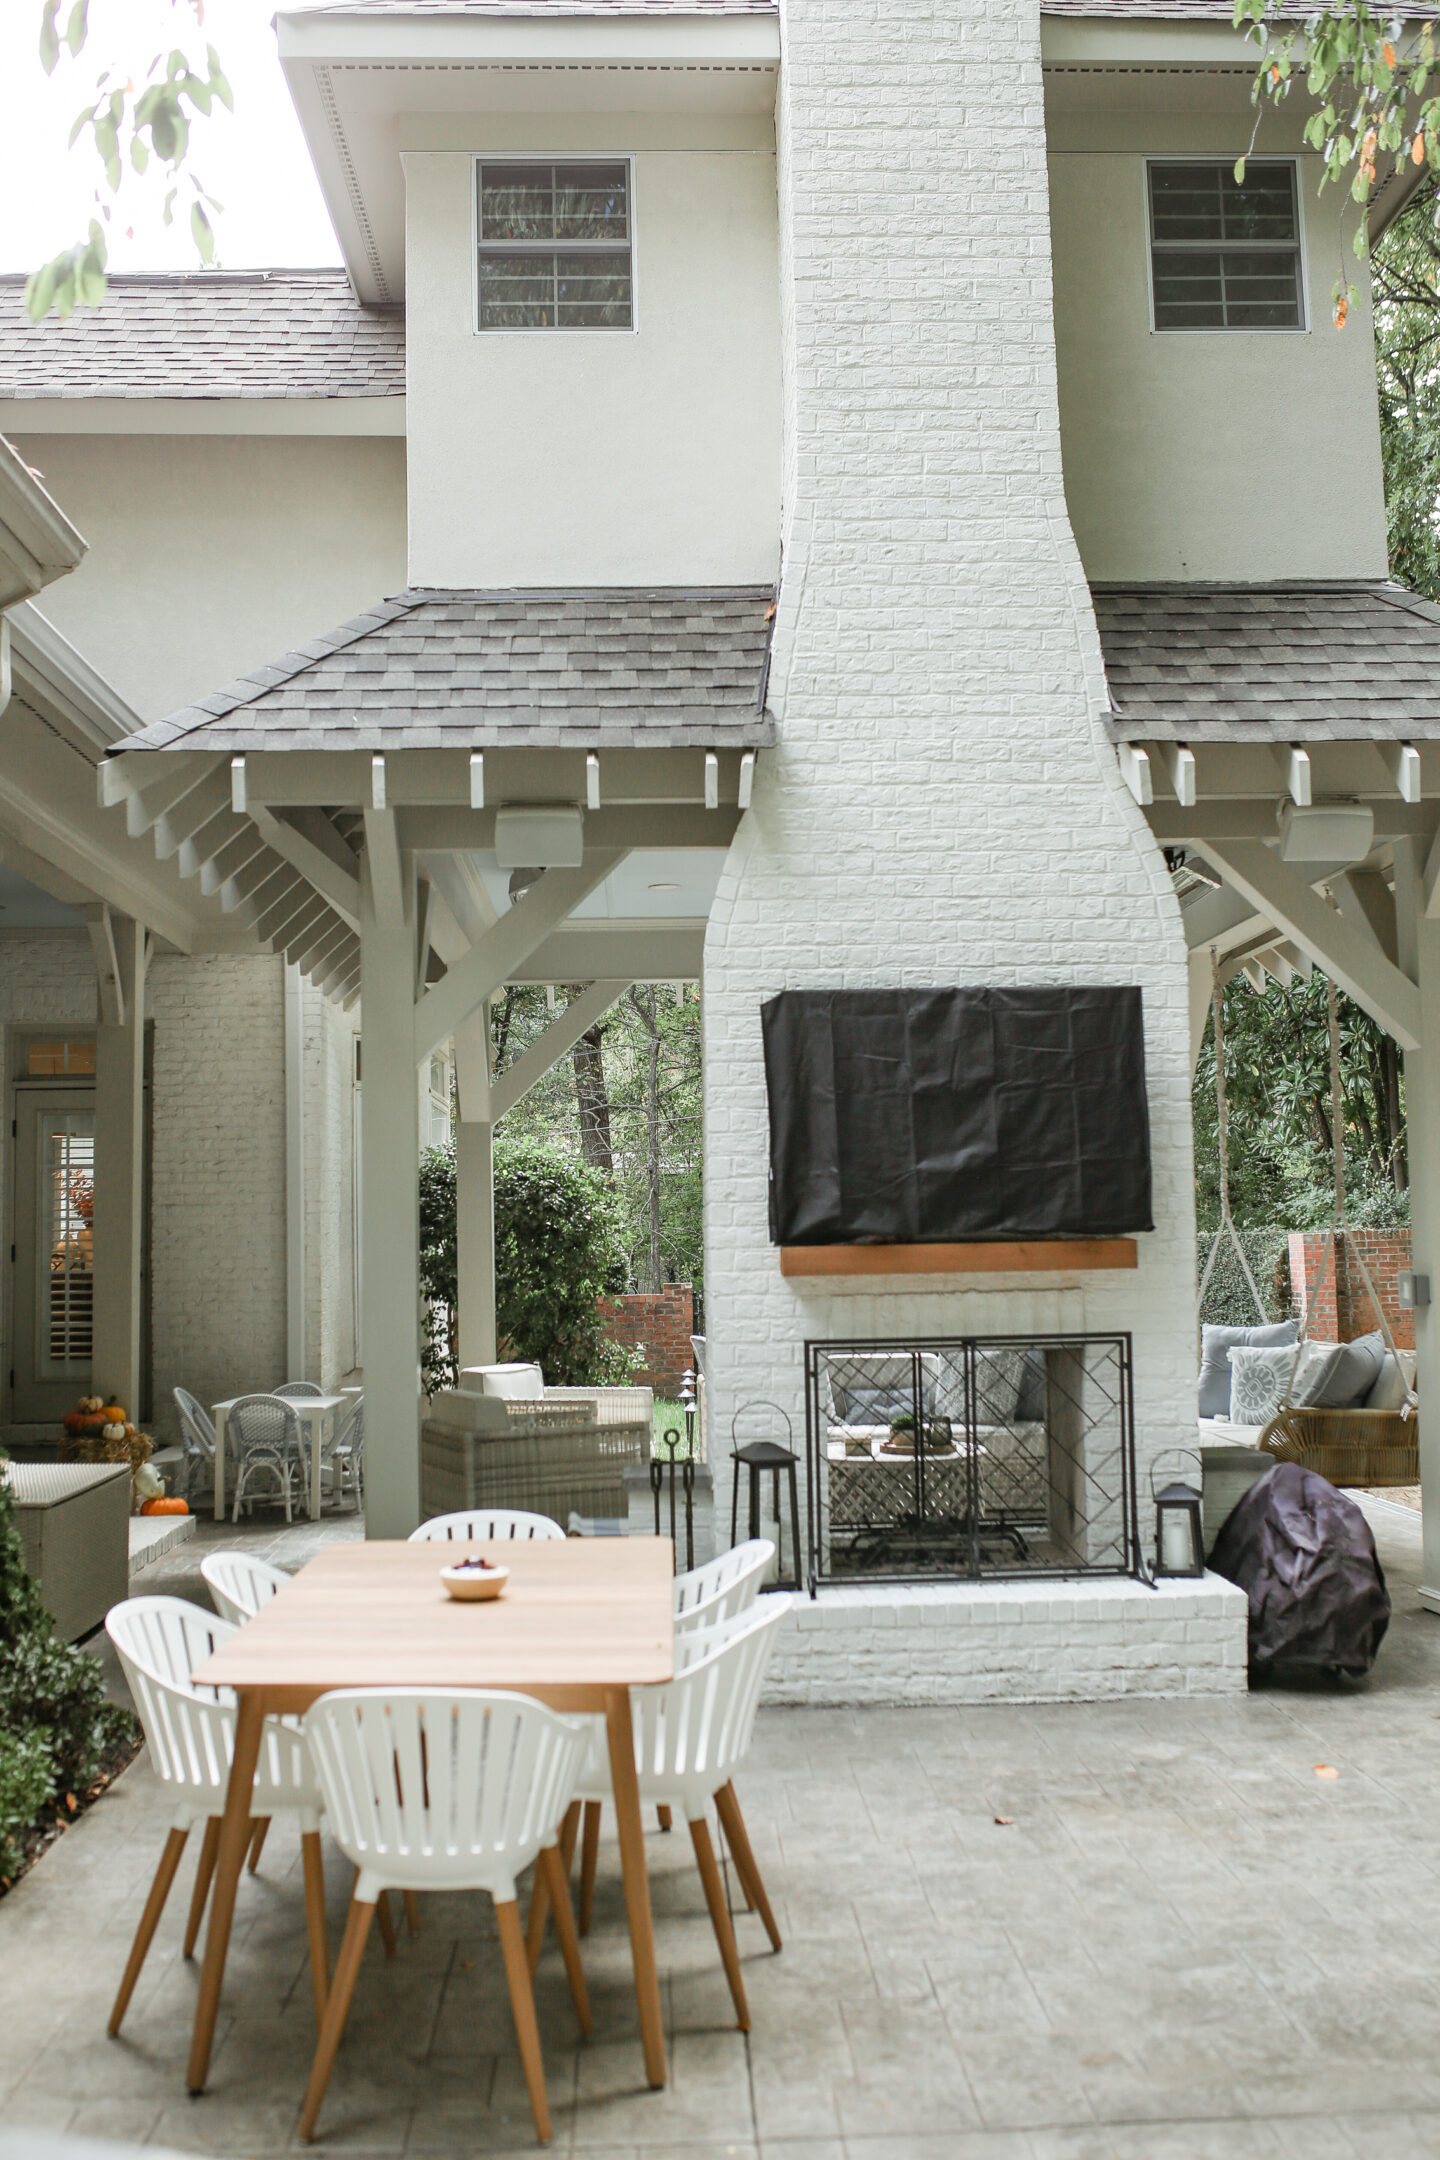 large outdoor brick fireplace with TV and outdoor table and chairs